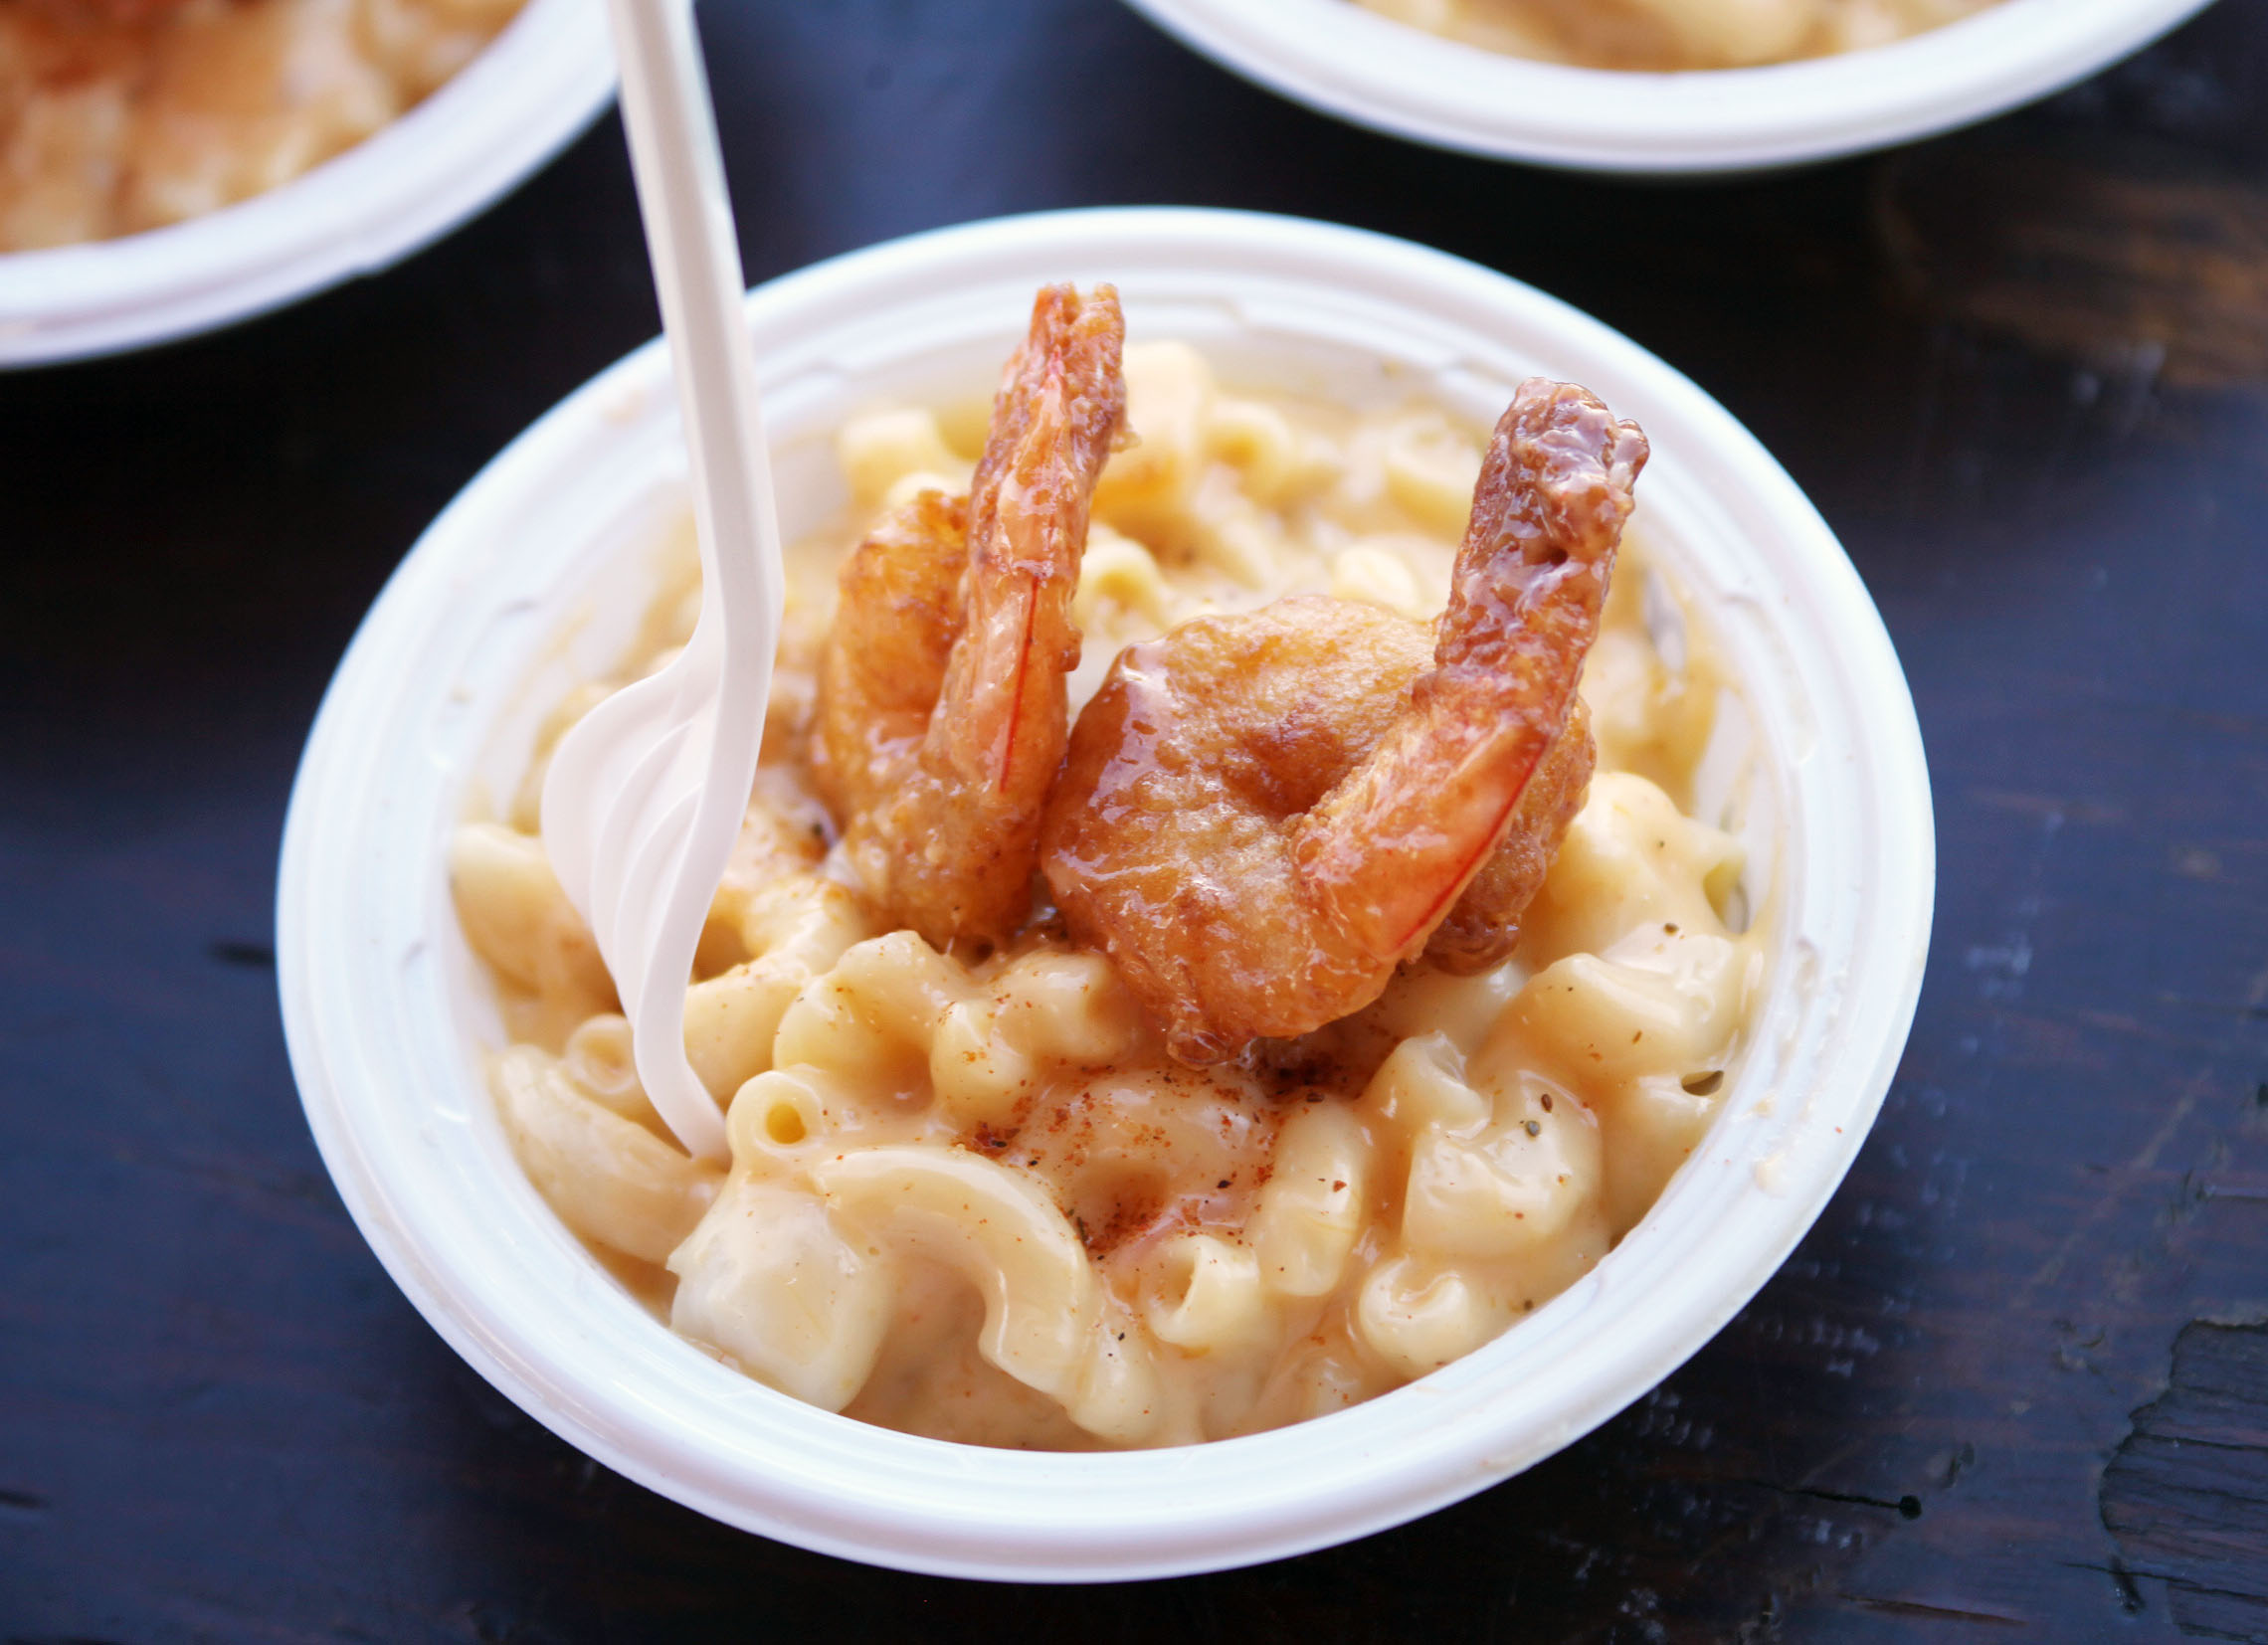 Fried shrimp with mac & cheese is one of the dishes offered at the St. Augustine Lions Seafood Festival. This dish was submitted for the seafood competition at the 2014 event. Photos by Renee Unsworth